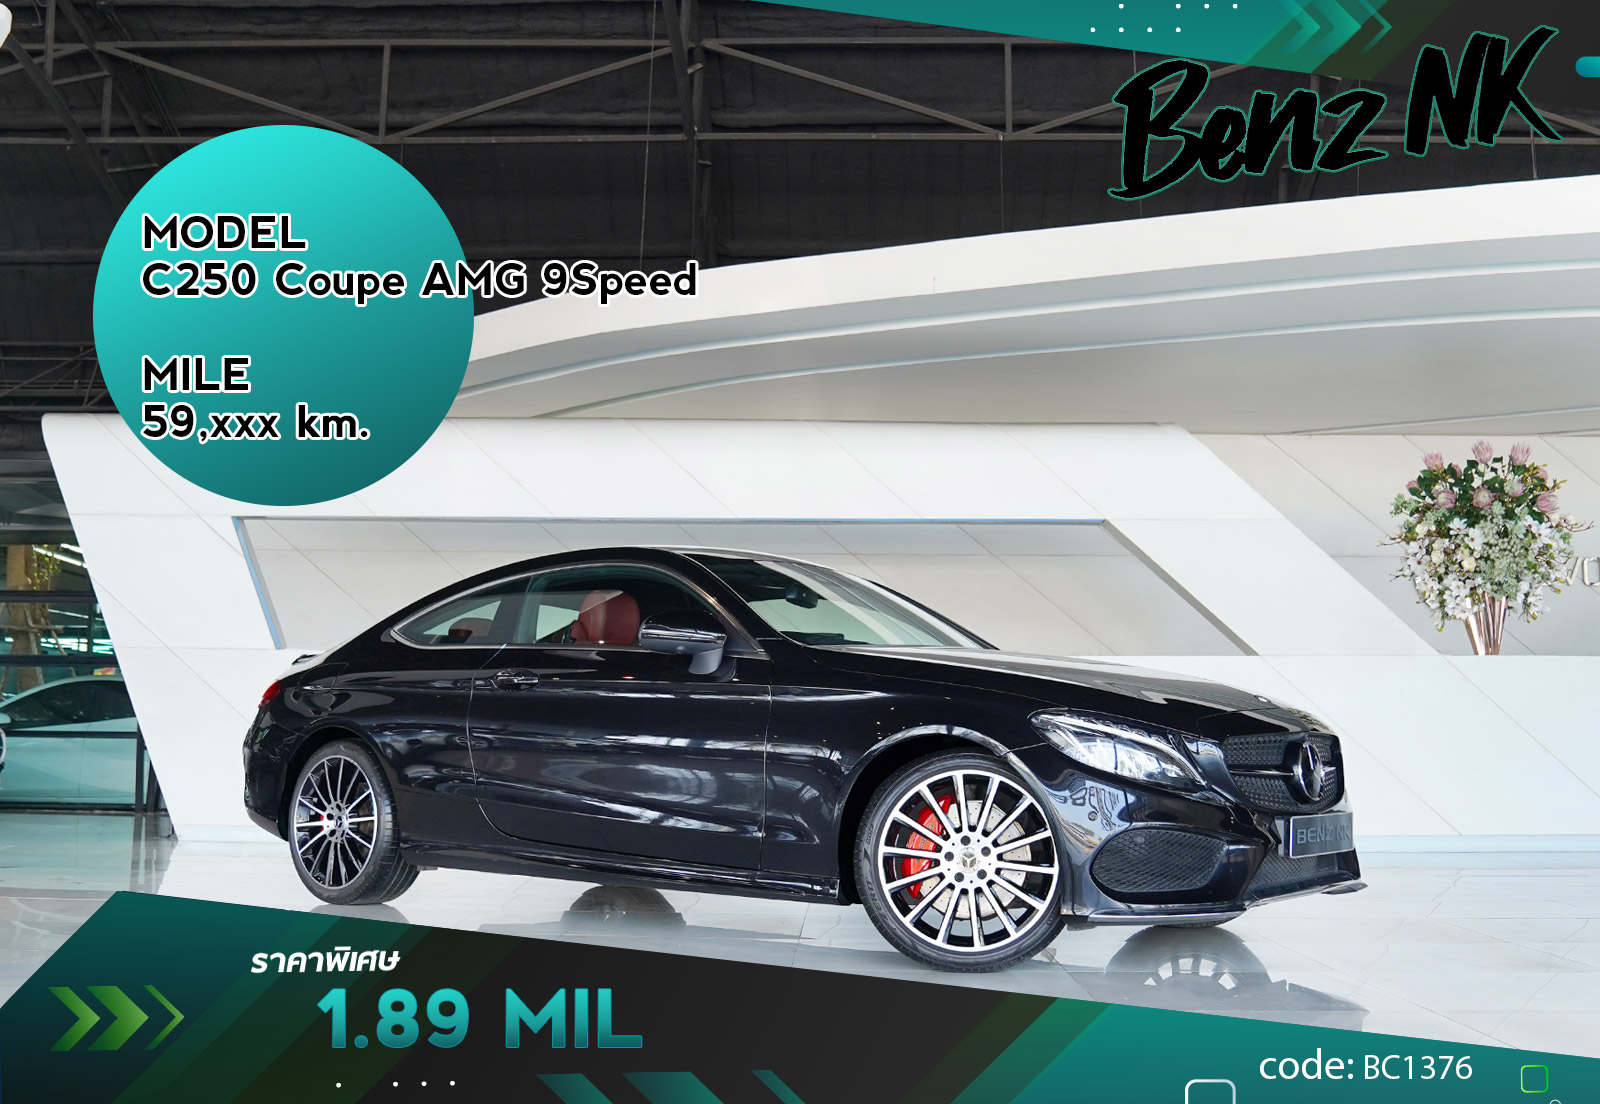 C250 Coupe AMG 9 Speed